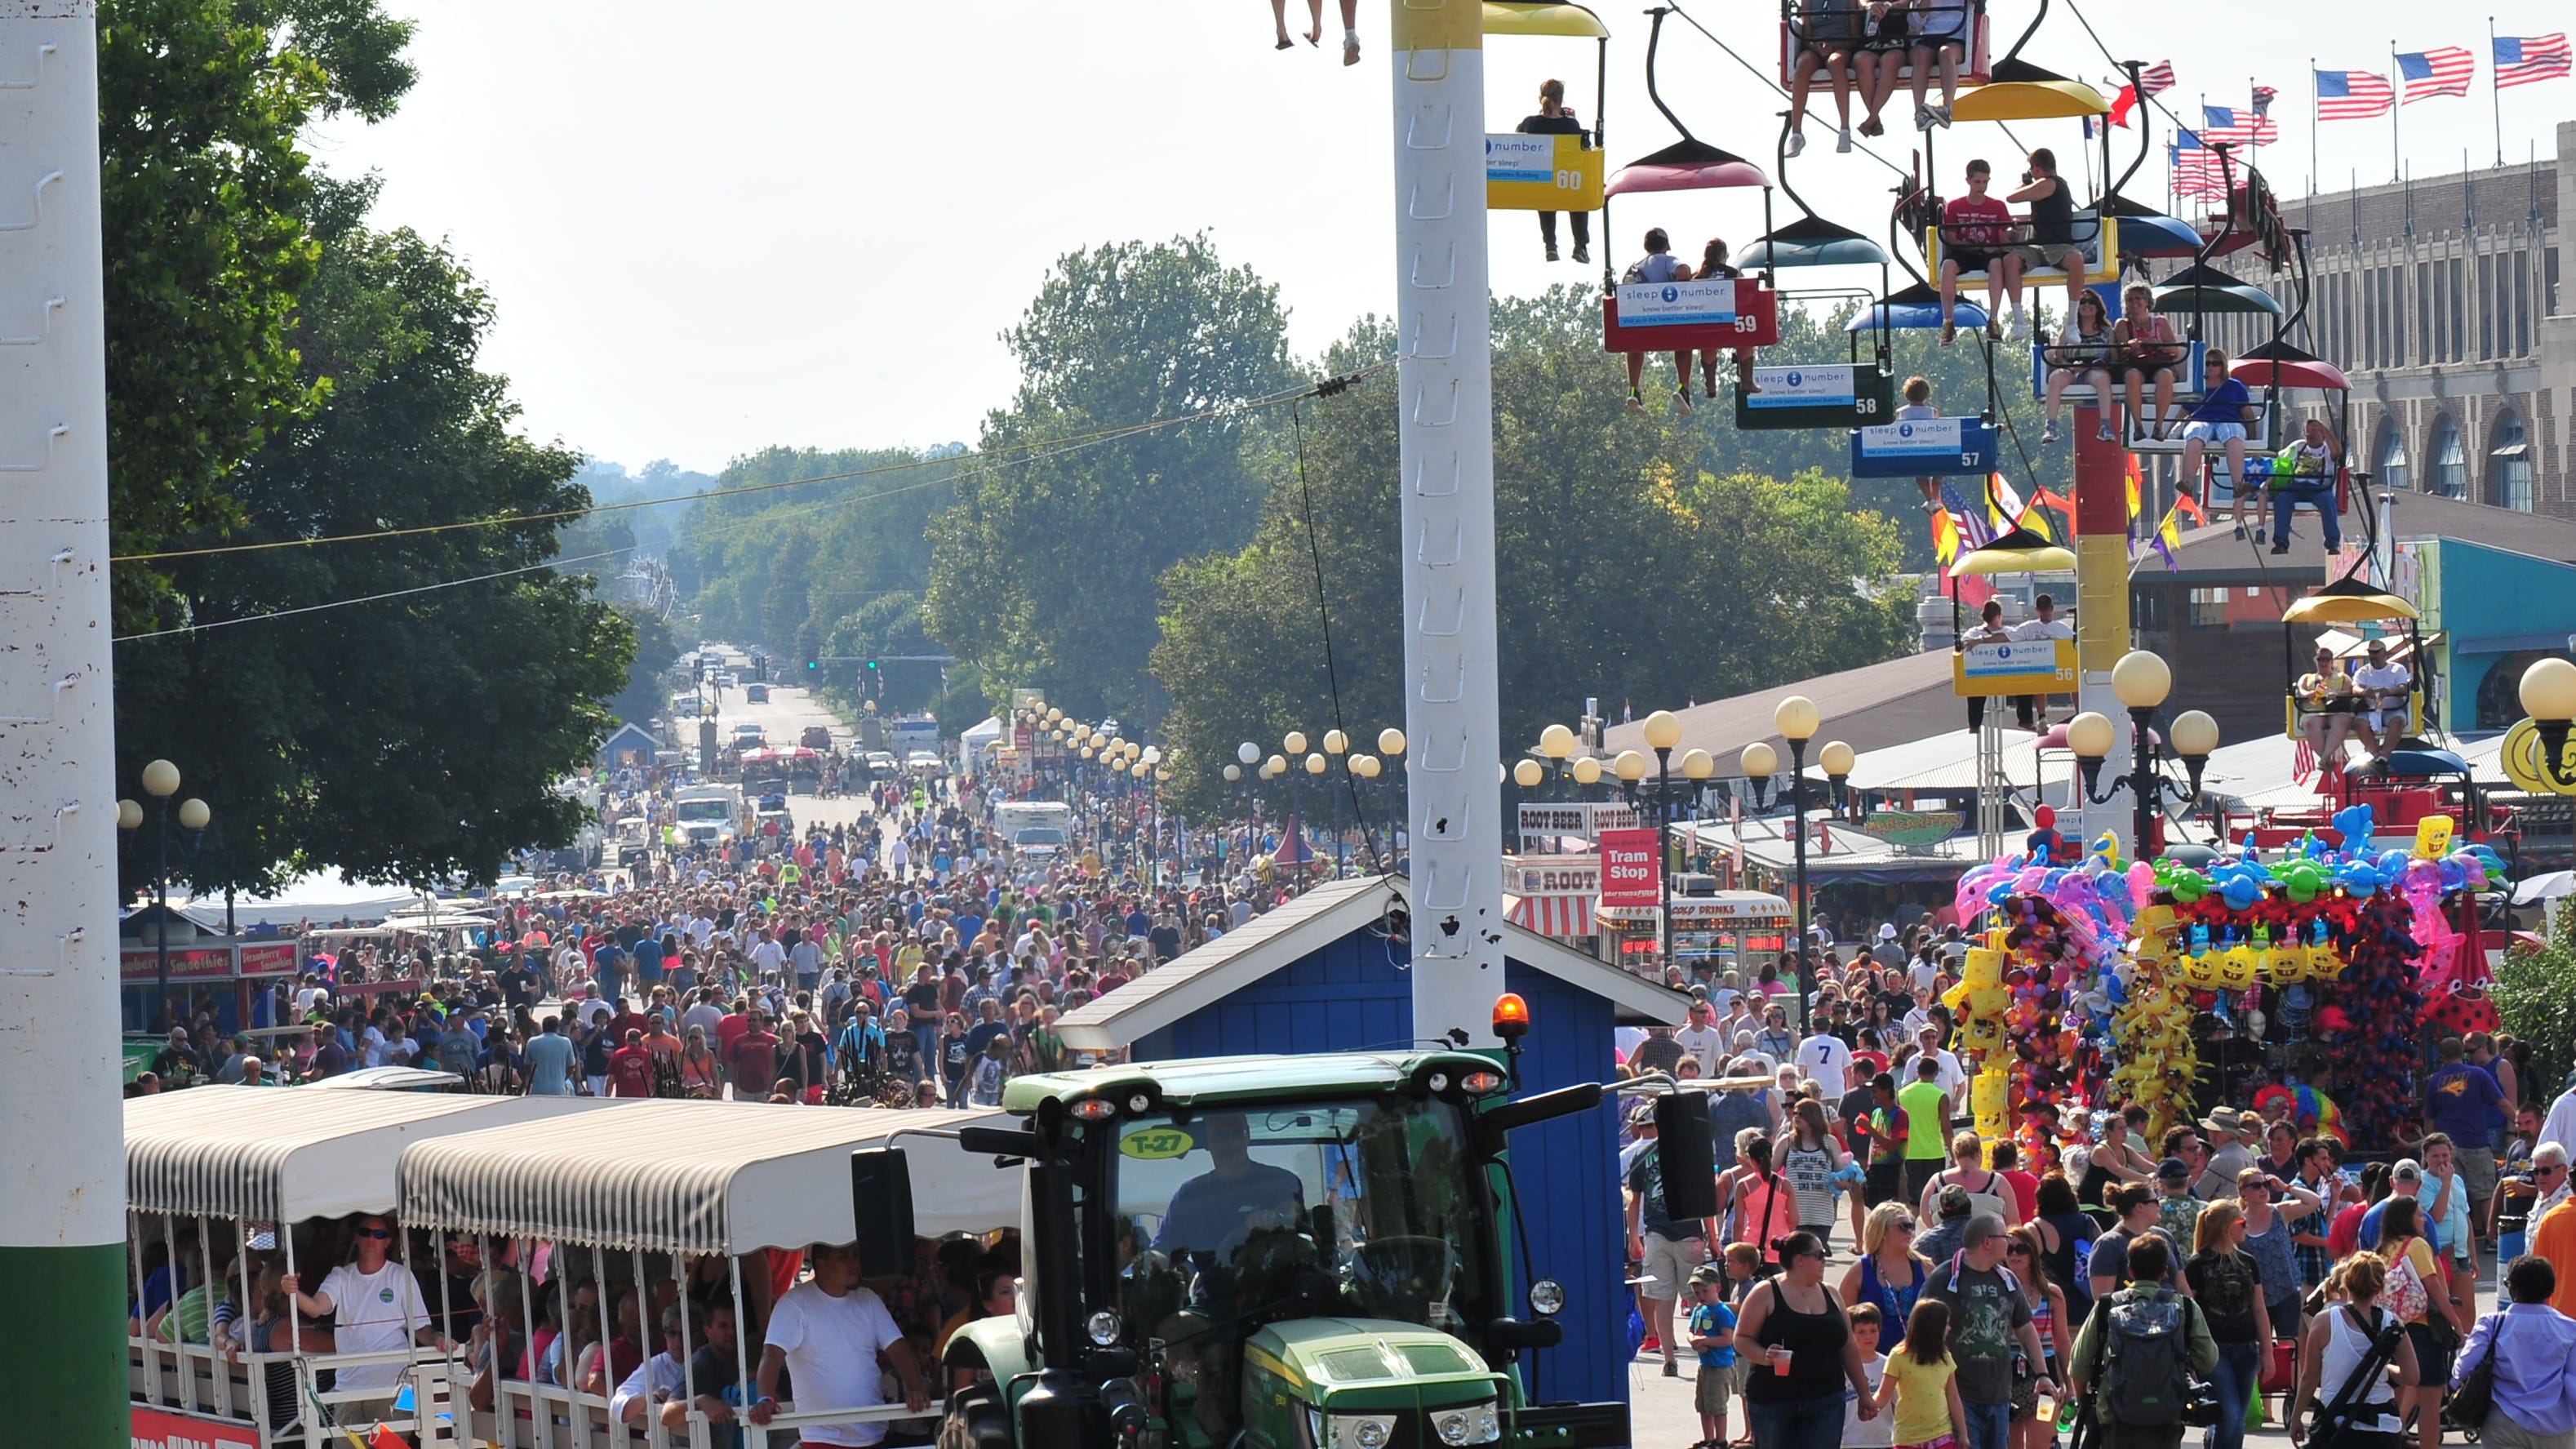 Iowa State Fair 2021 new changes including COVID vaccines, shuttles